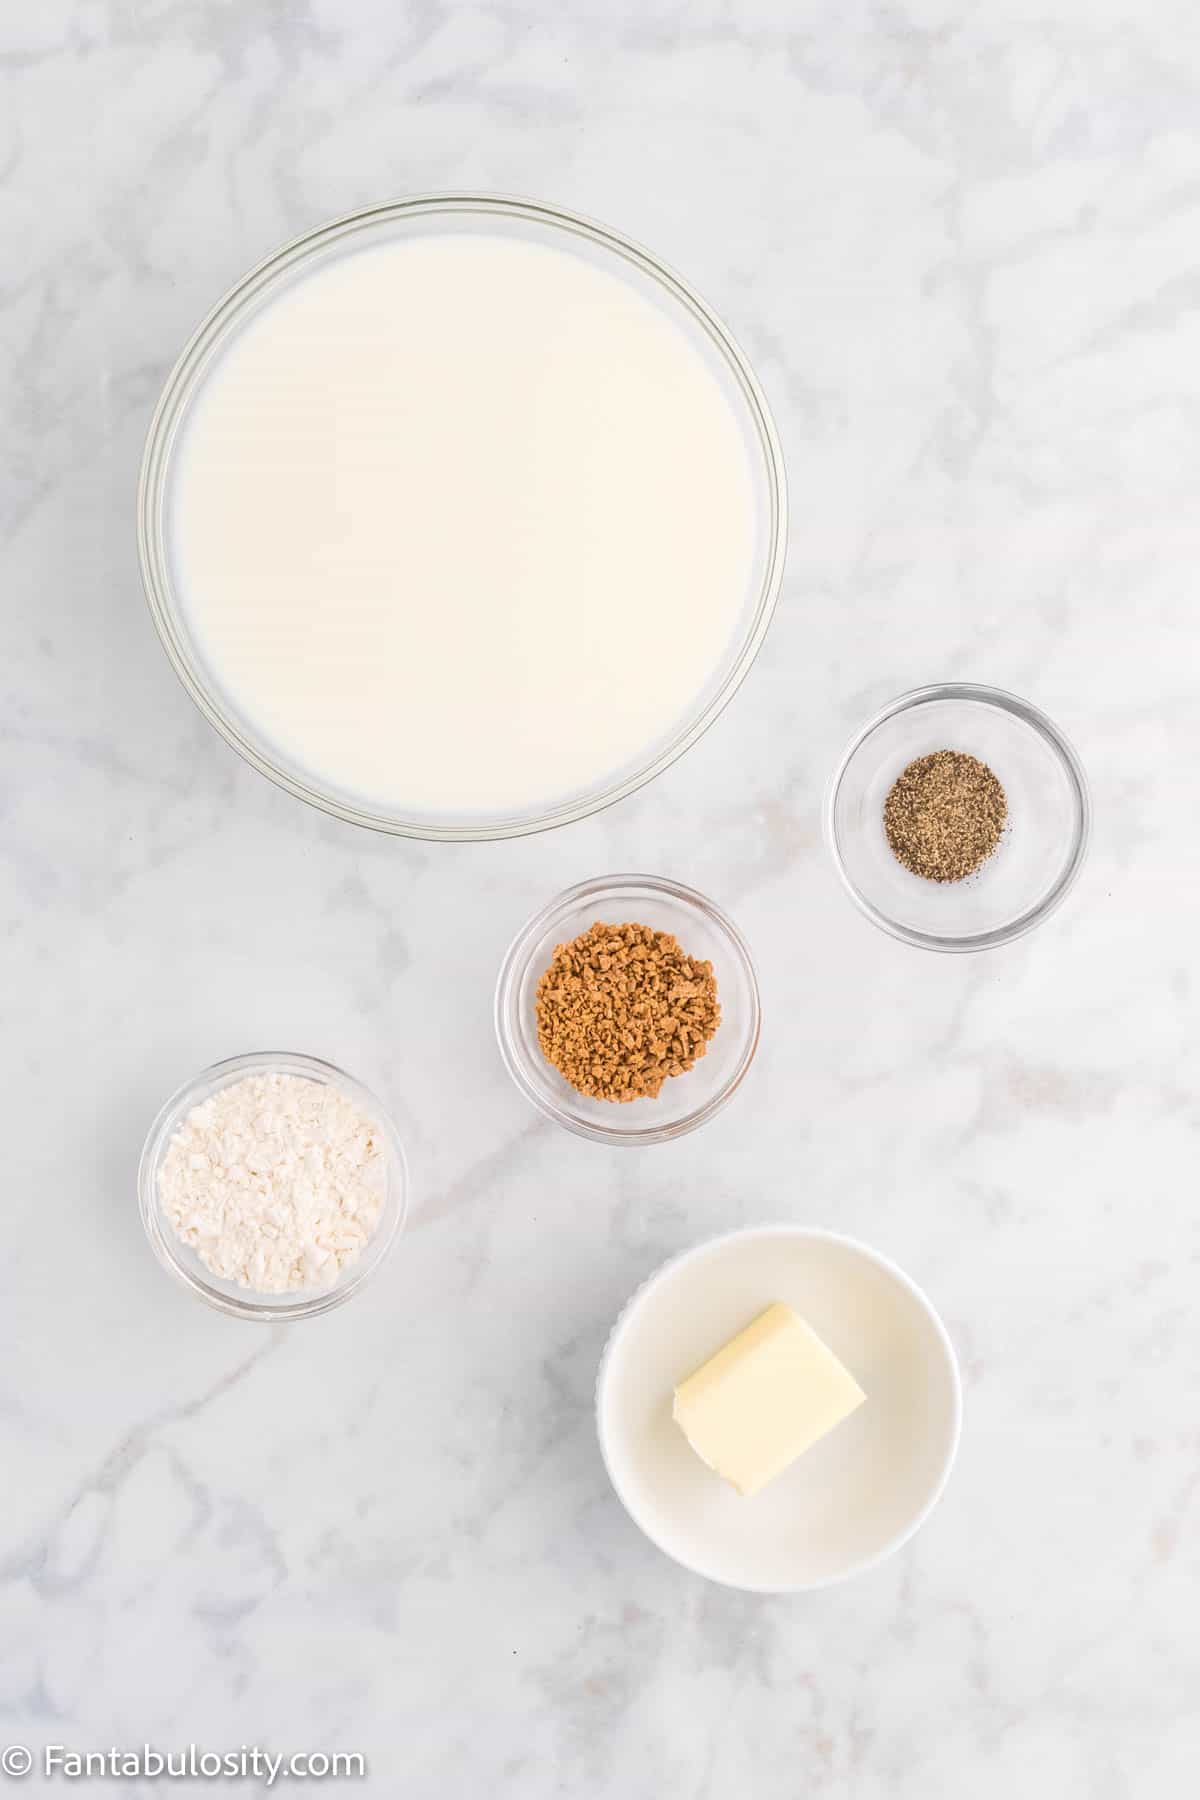 Milk, butter, flour and bowls of spices are displayed on a white marble background